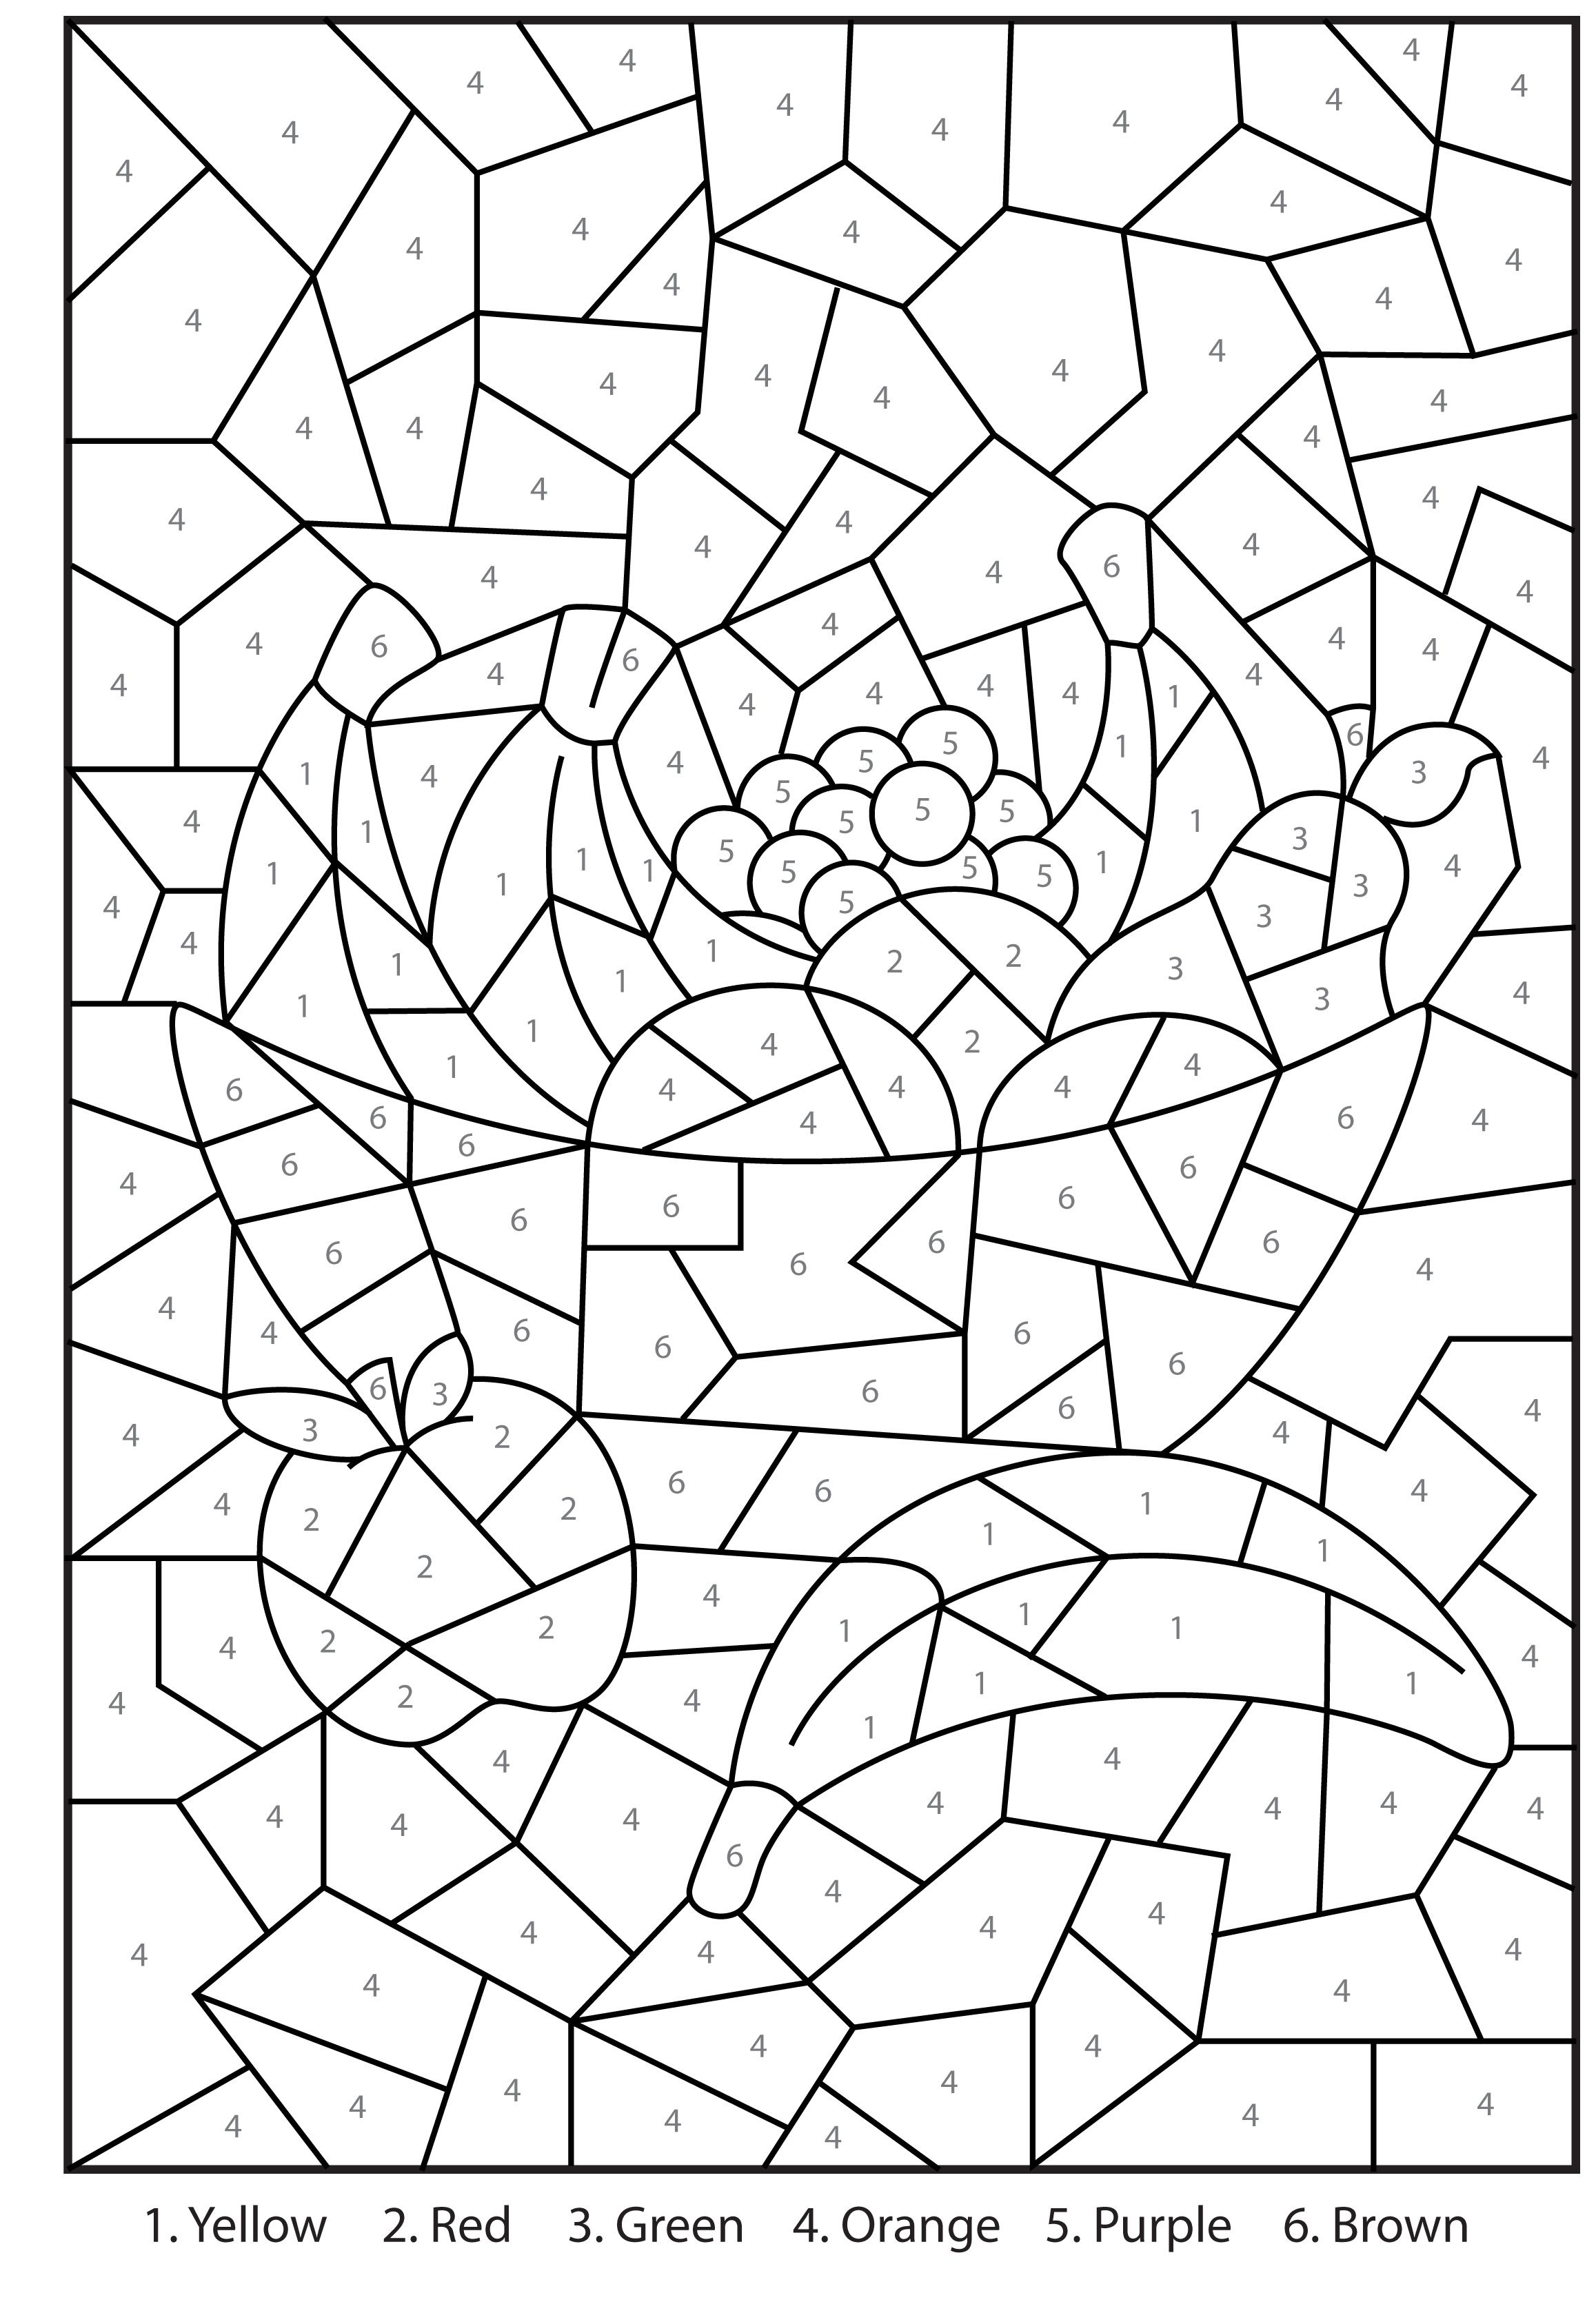 Coloring Coloring Pages Color Number Printableg C0Lor Math 3Rd Free Printable Multiplication